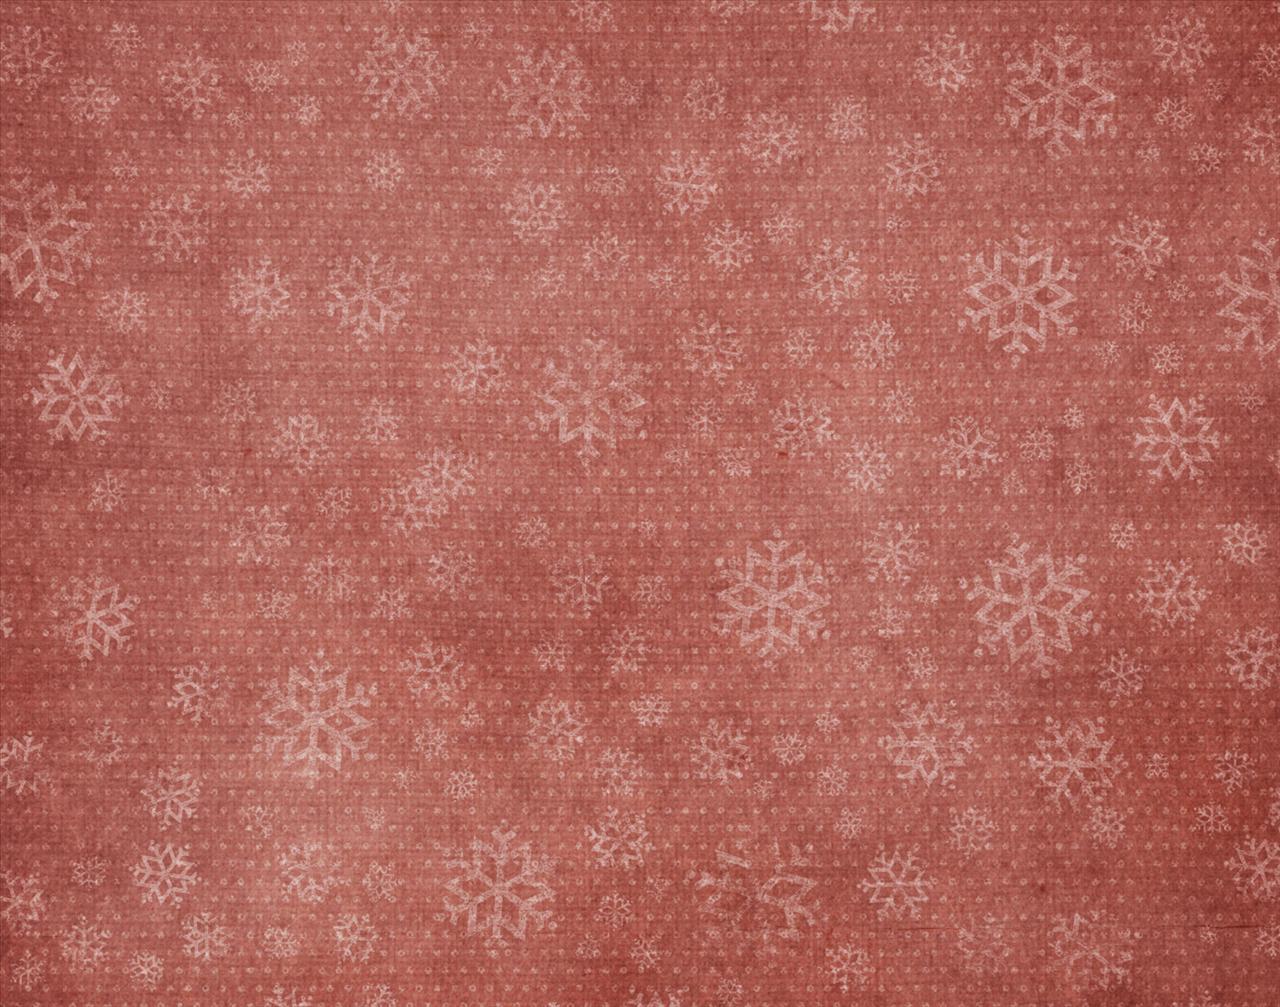 Fading Snowflake Backgrounds